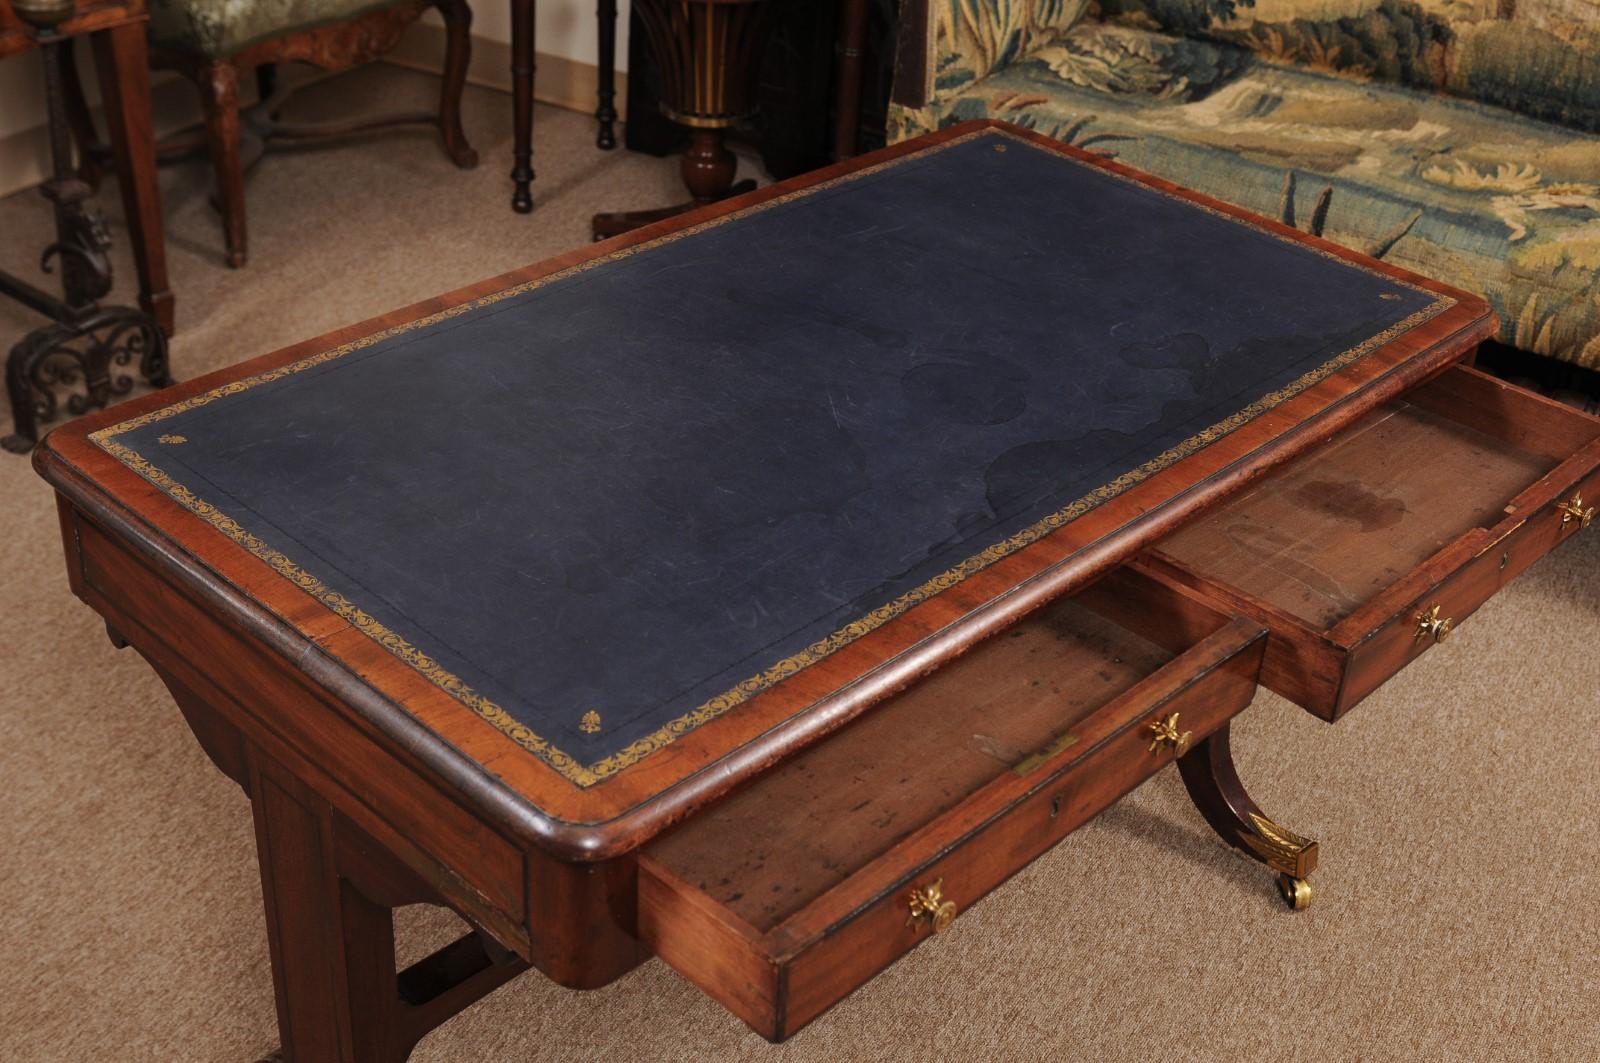 The Regency mahogany writing table with embossed blue leather top, inlay, two drawers with brass pulls, stretcher and splayed legs with brass castors. 

 